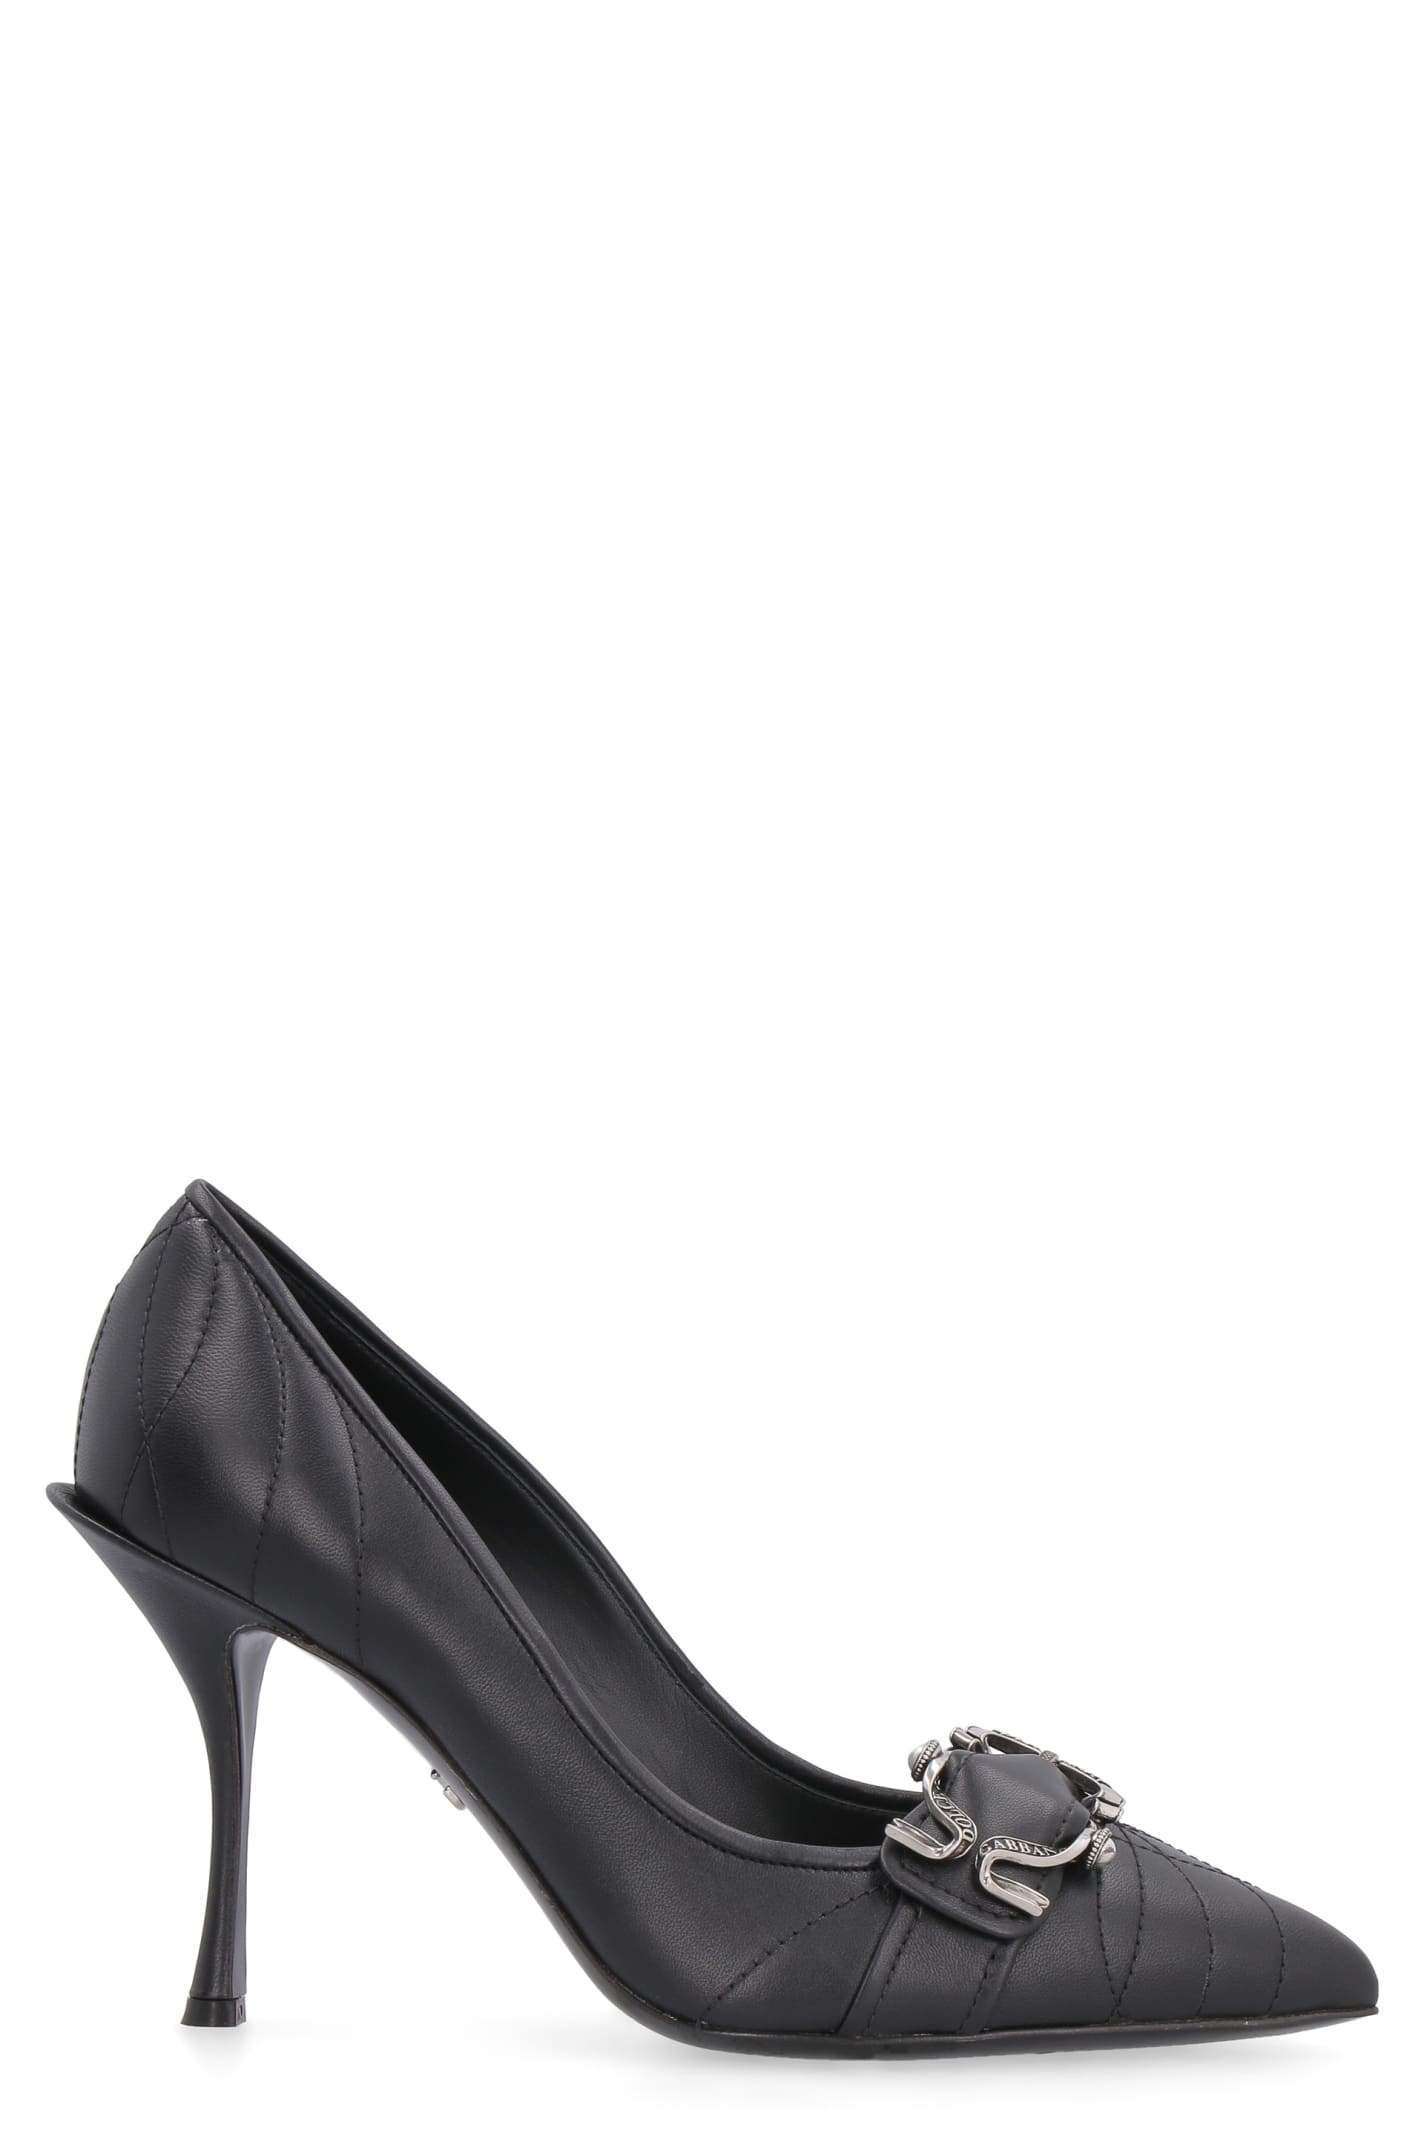 Dolce & Gabbana Leather Pointy-toe Pumps